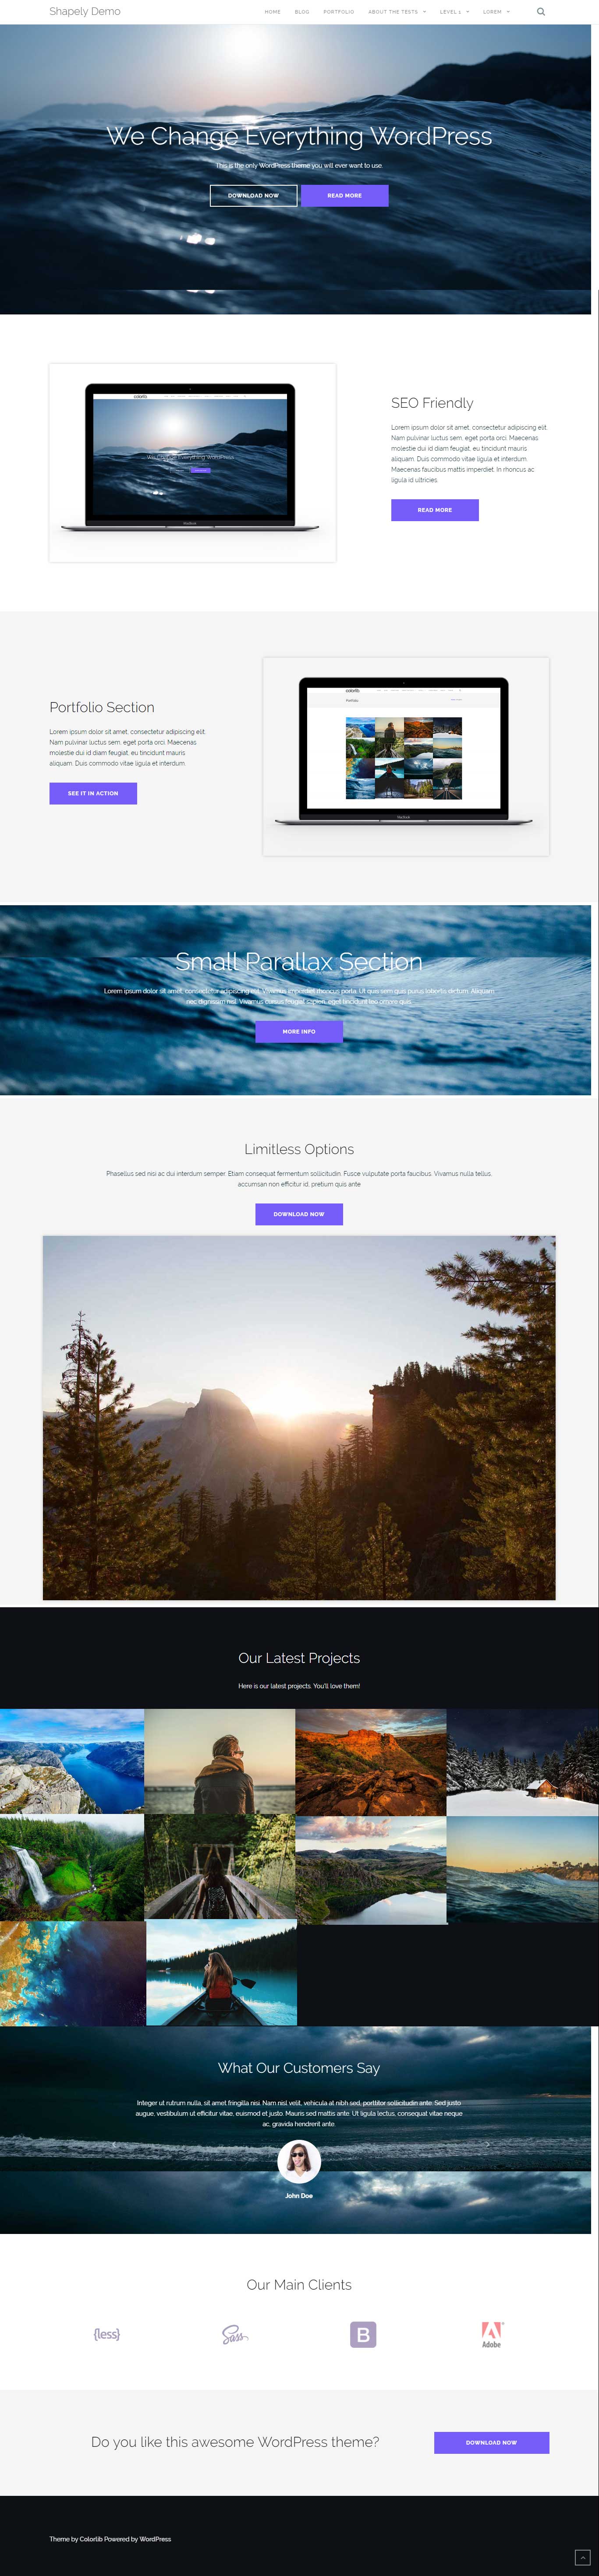 Shapely – One Page WordPress Theme Free Download